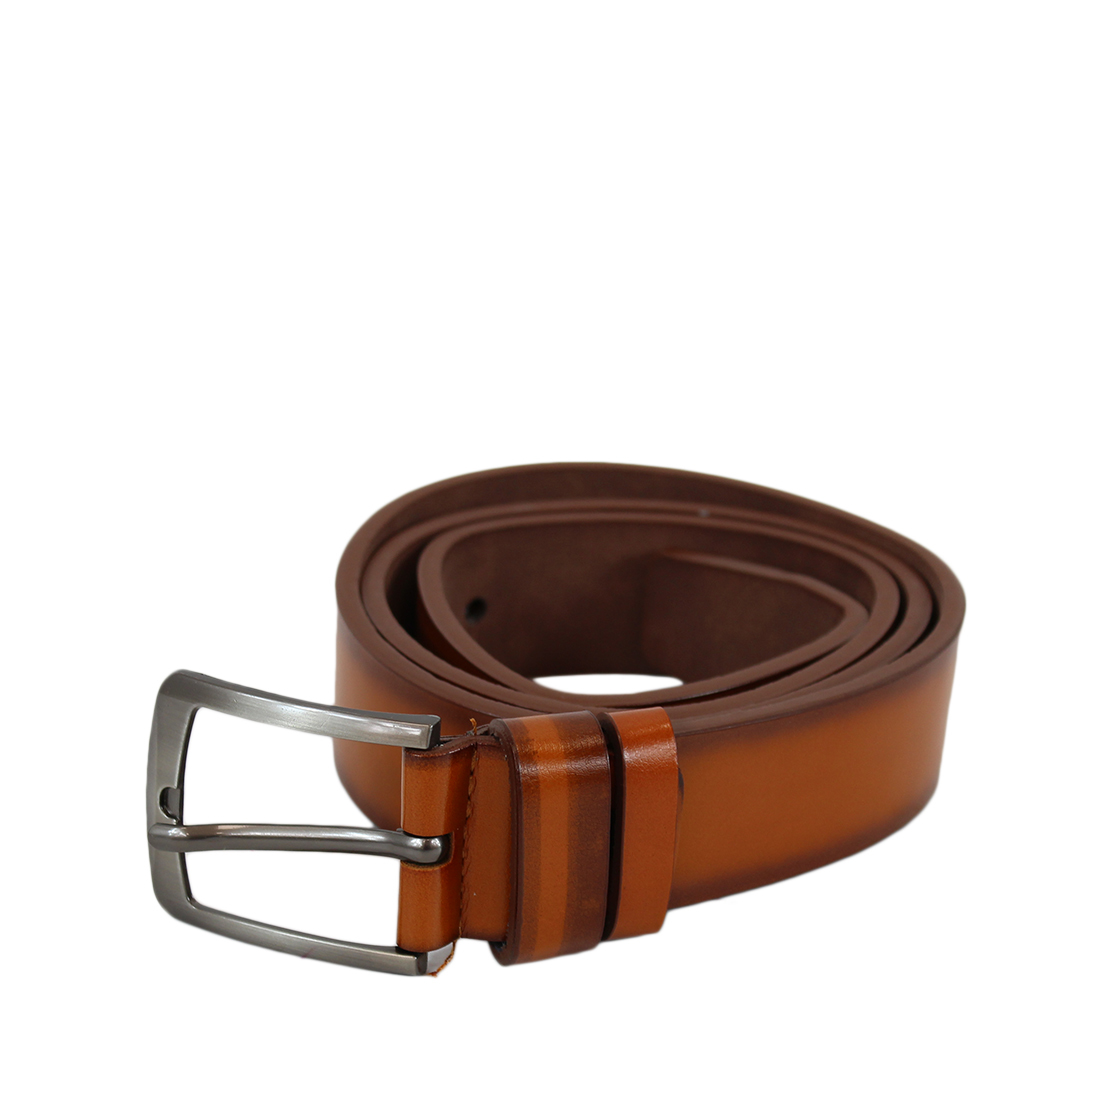 Plain shiny wide leather belt with silver buckle